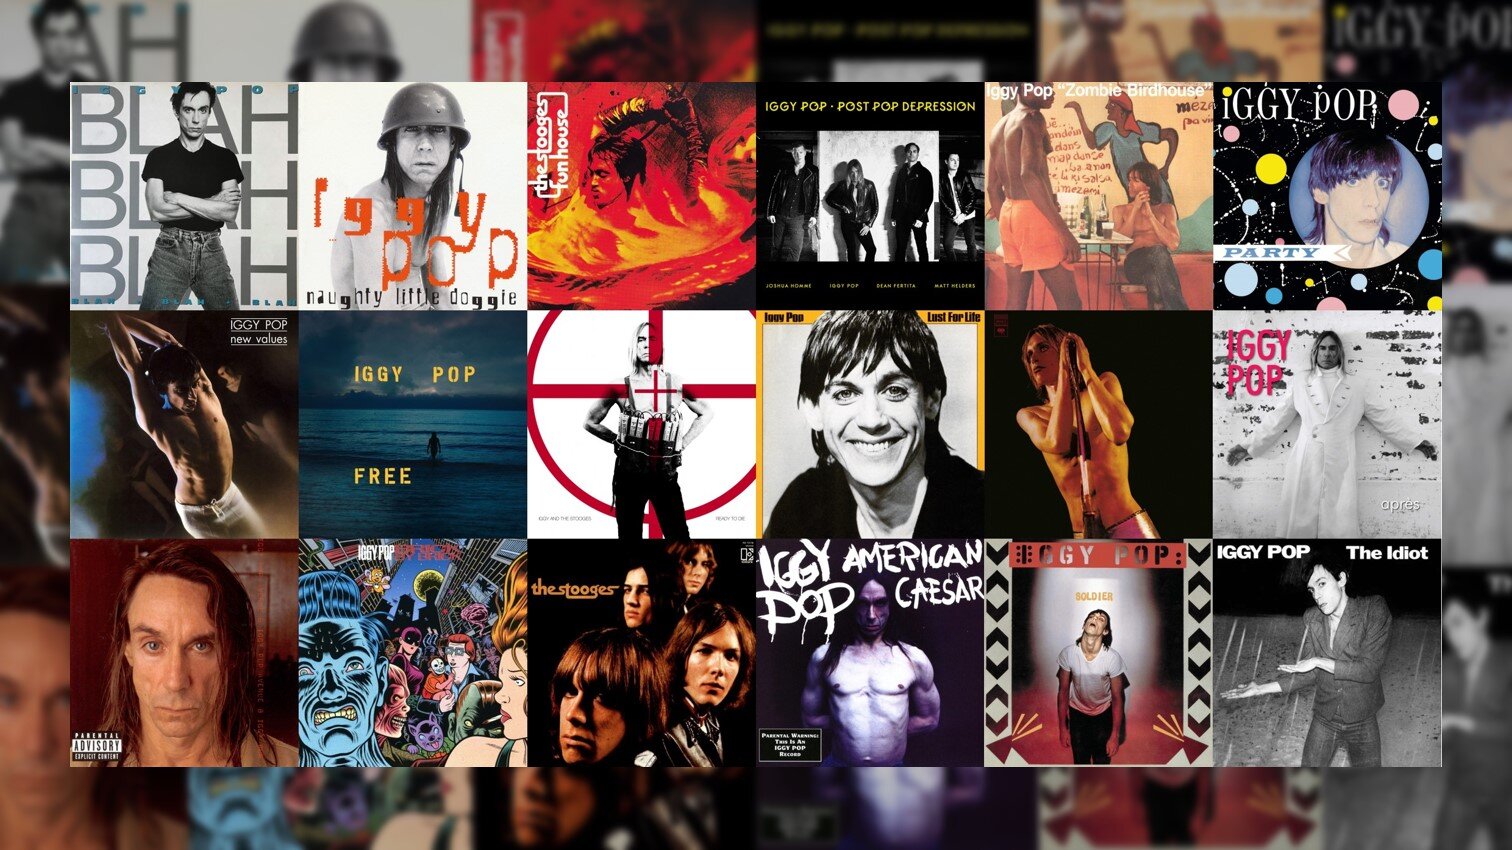 READERS' POLL RESULTS: Your Favorite Iggy Pop Albums of All Revealed & Ranked